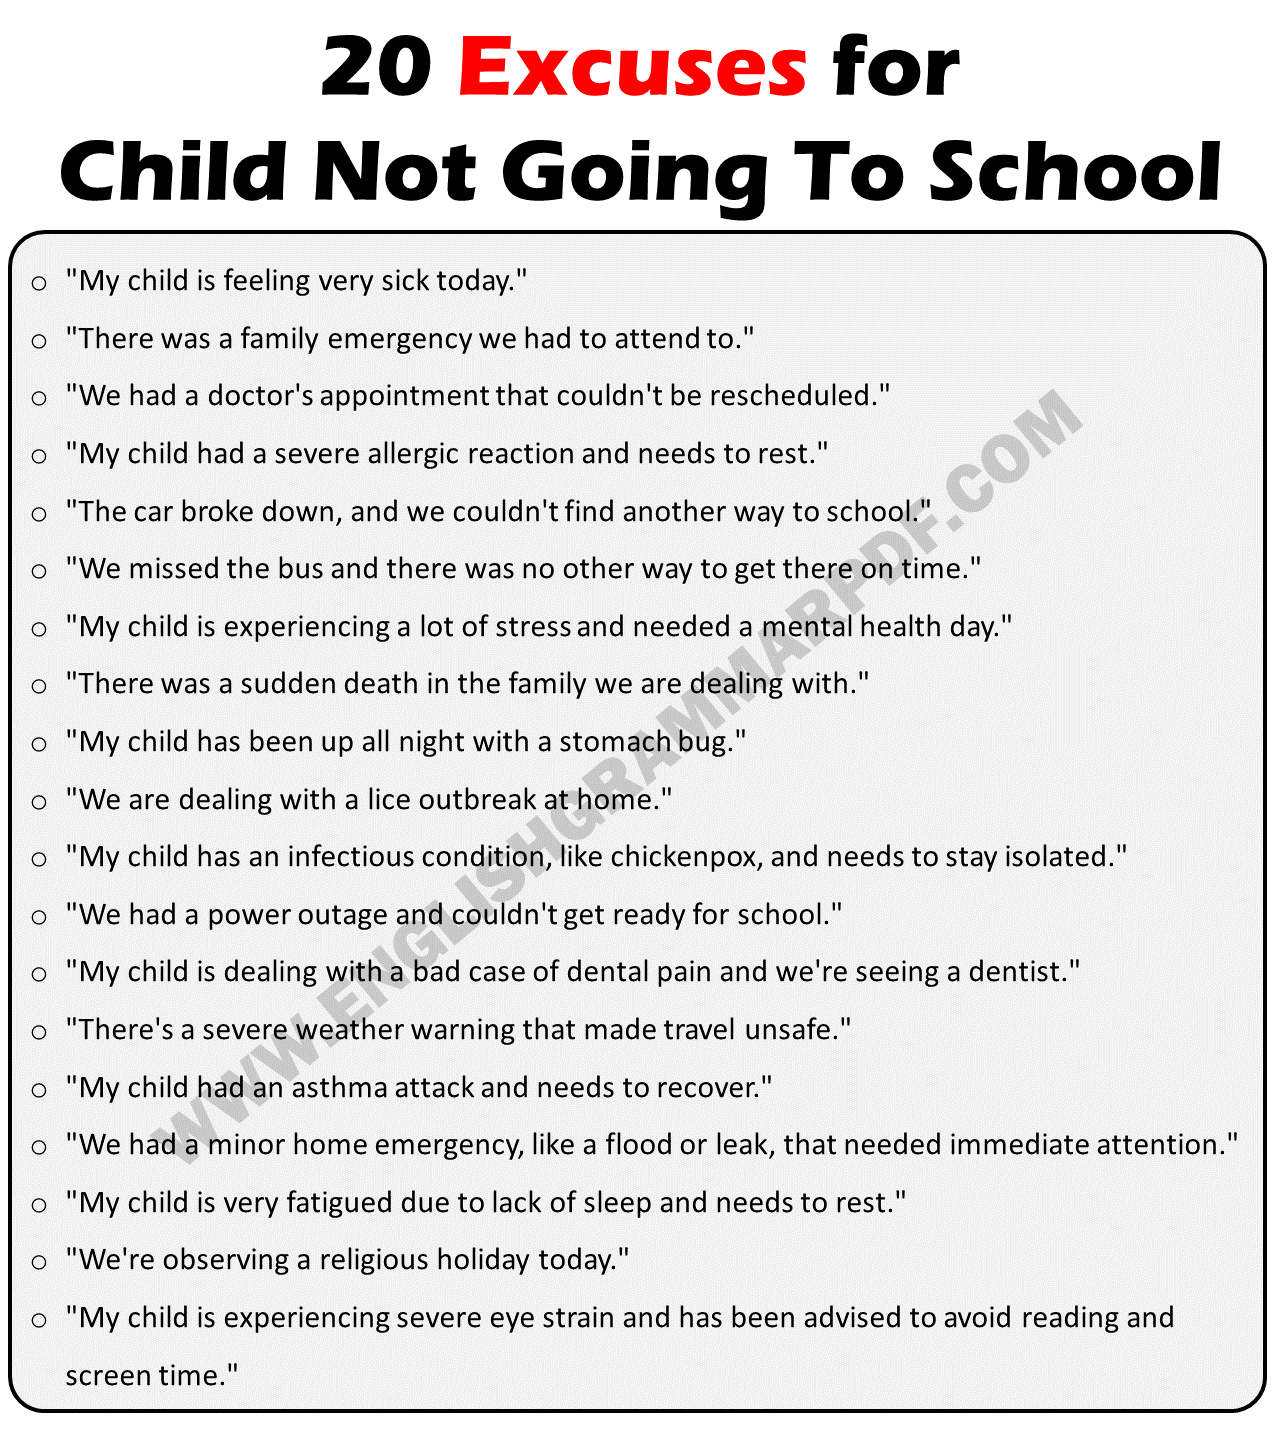 Excuses For Child Not Going To School